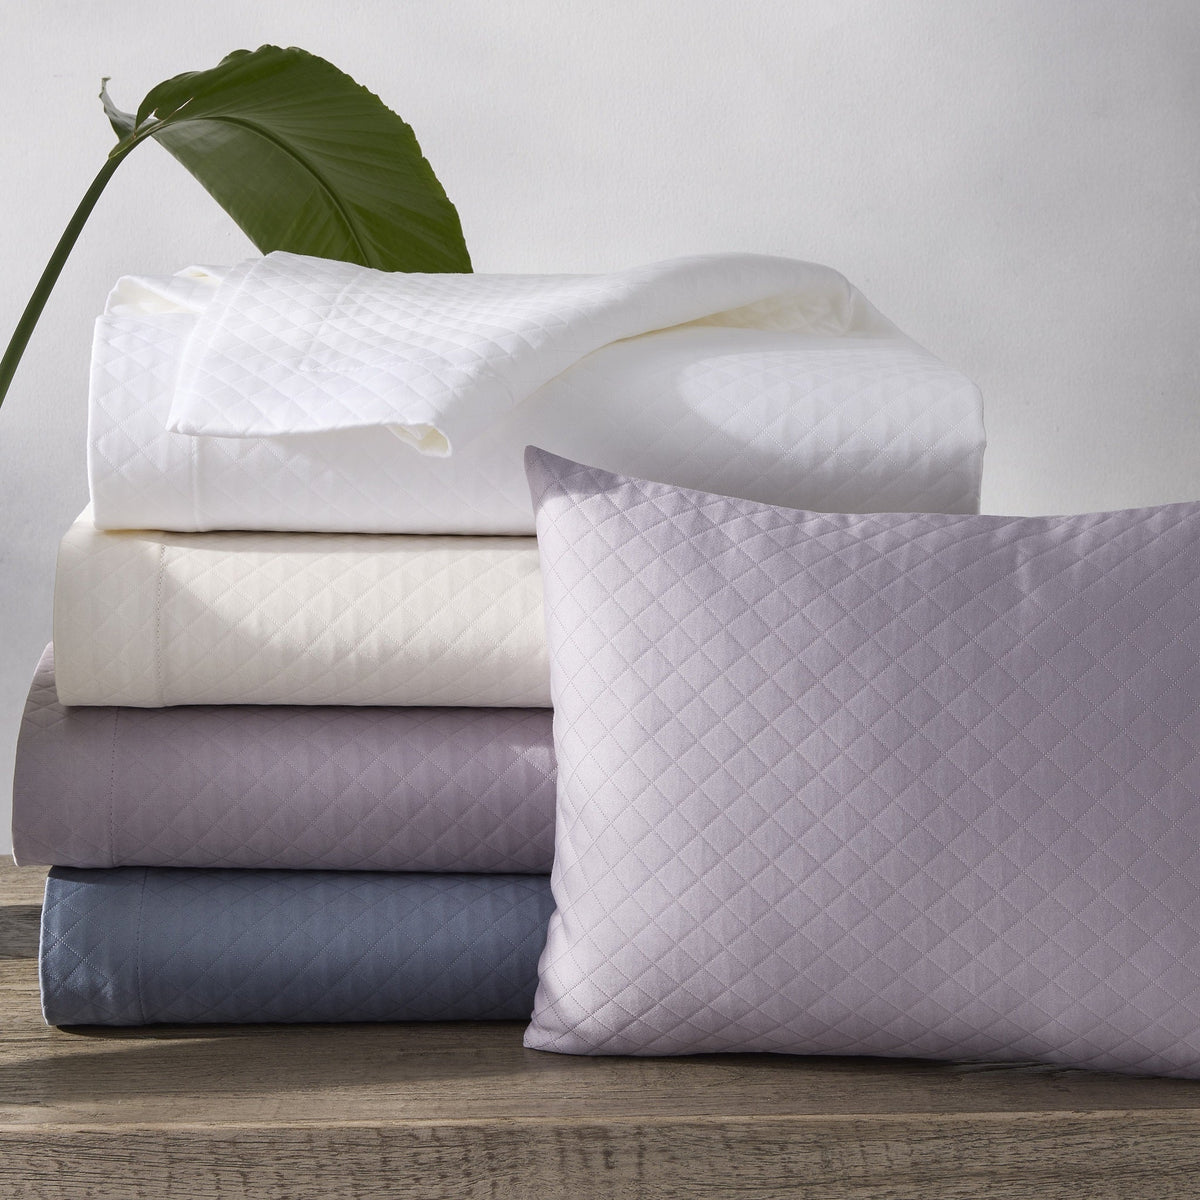 Stack of Matouk Petra Bedding in Different Colors